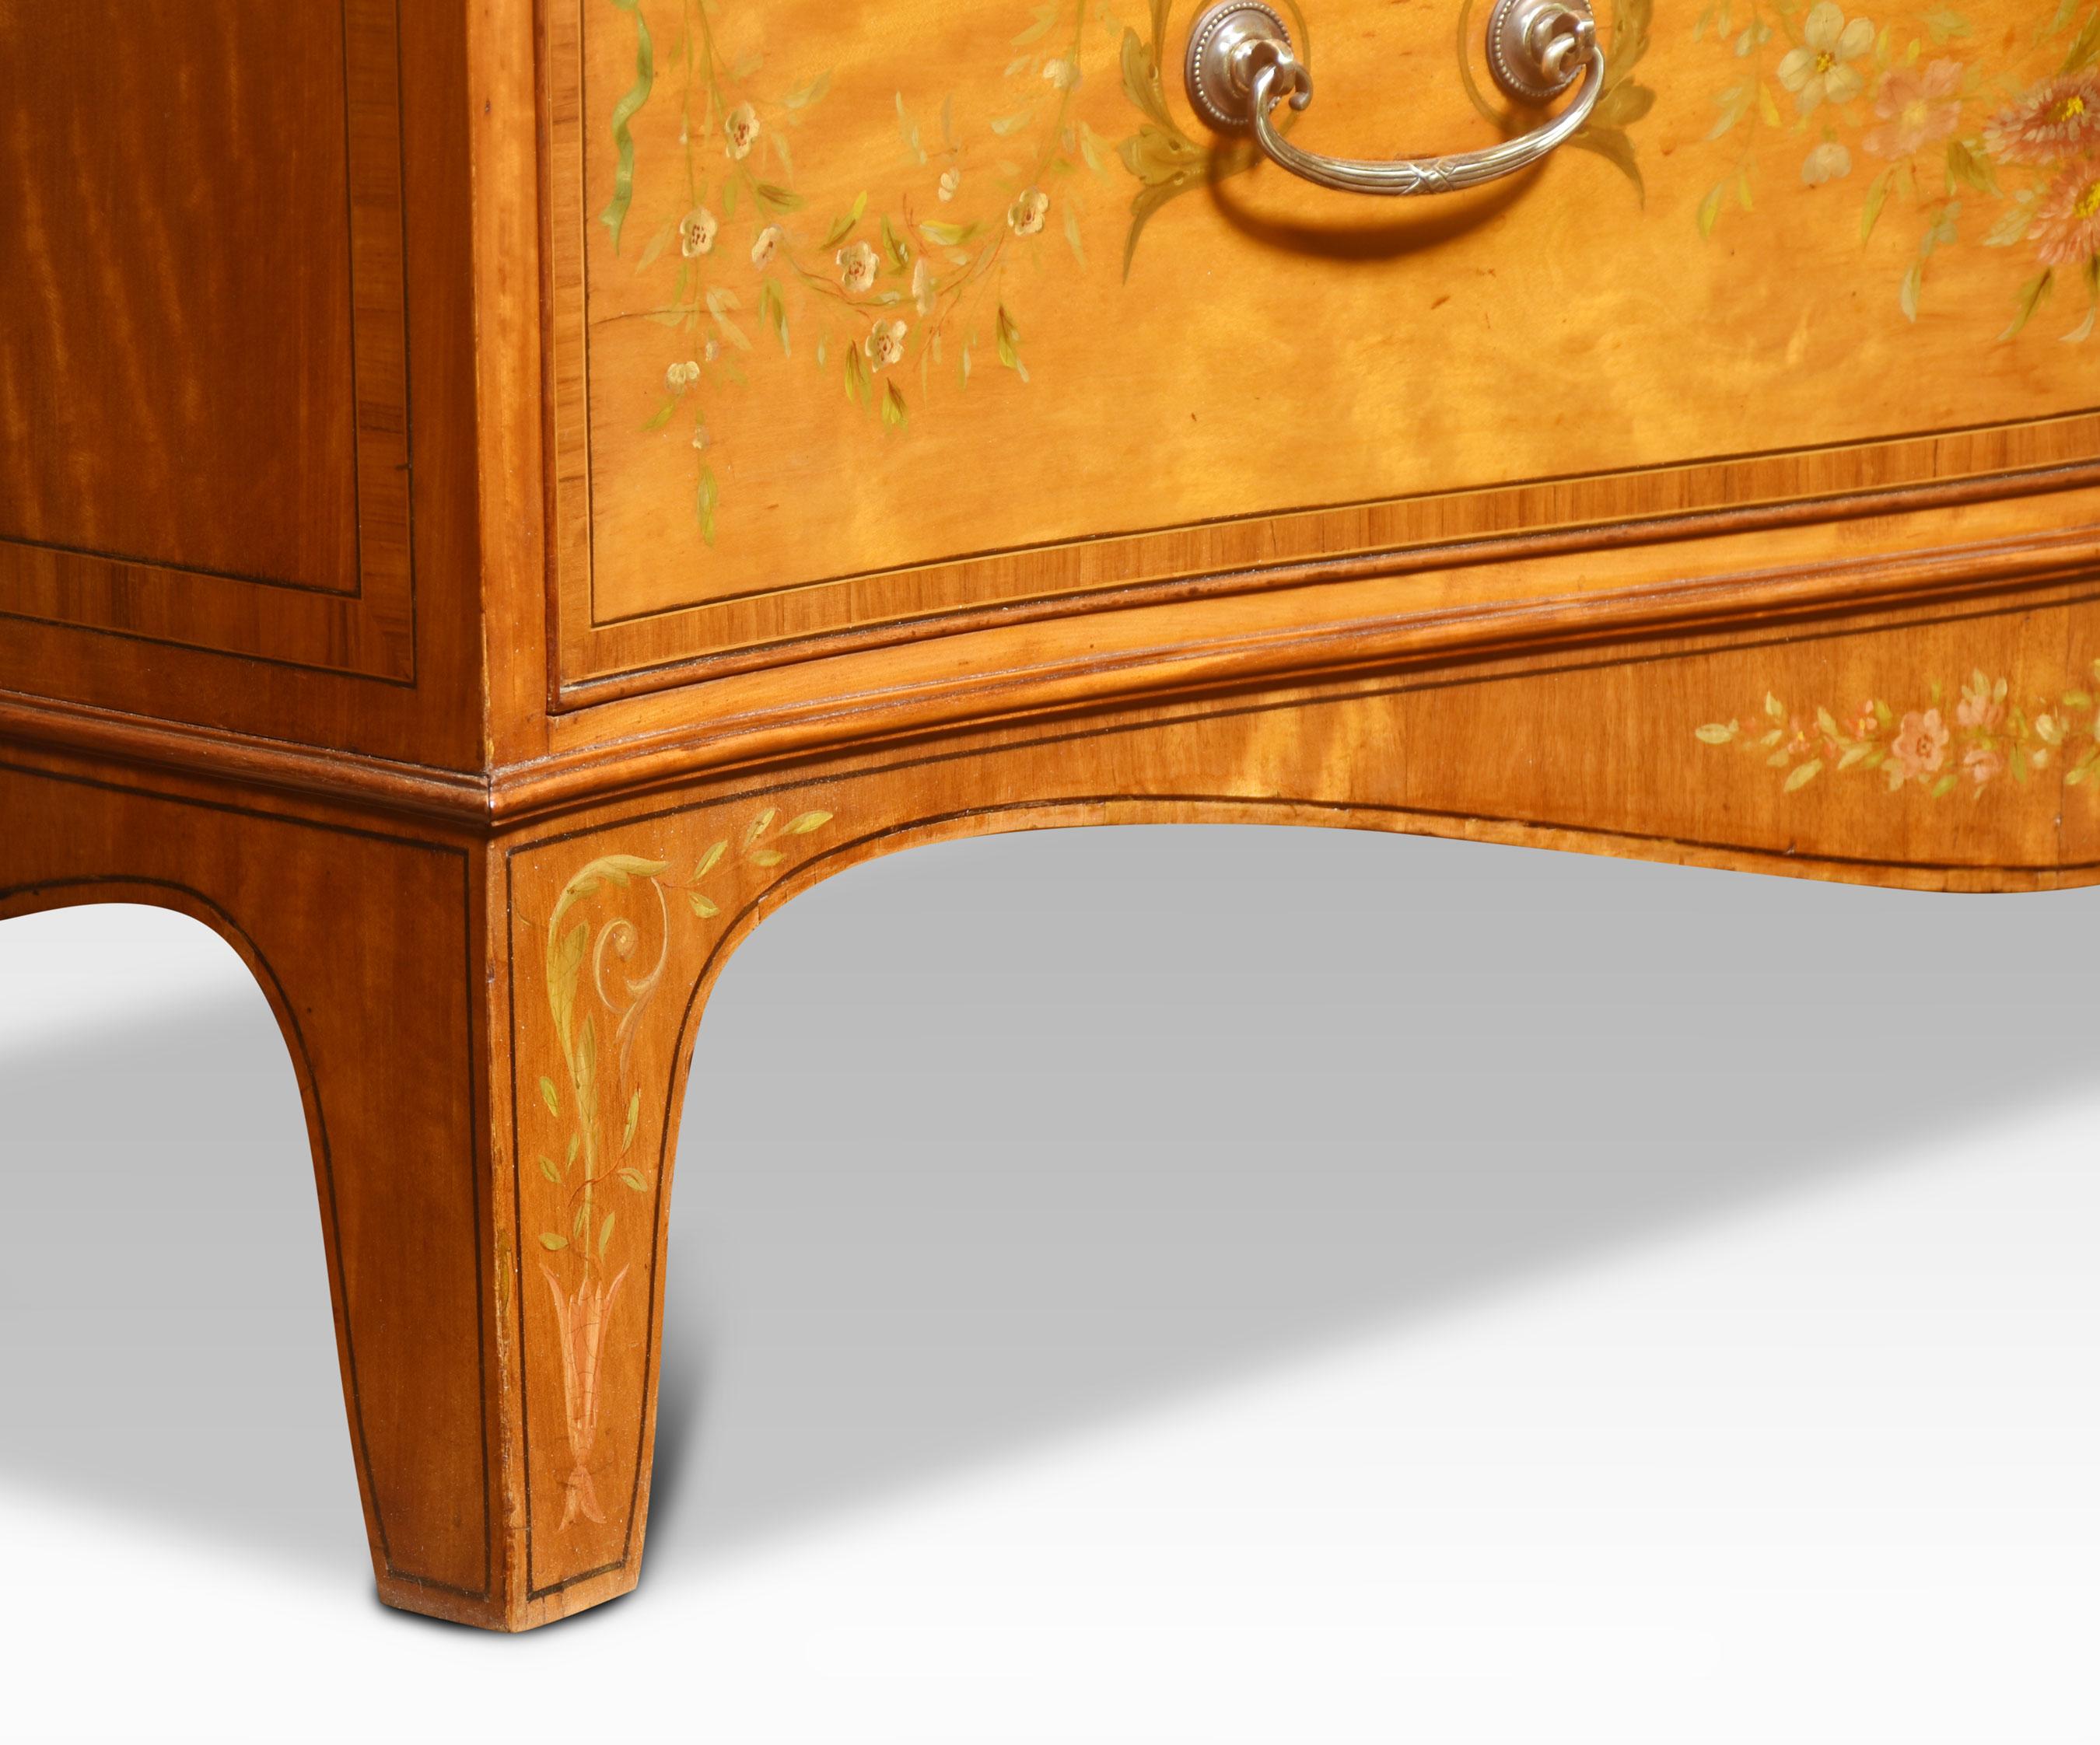 Satinwood chest of drawers, the large rectangular serpentine top having floral painted banding above three long graduated drawers with further painted detail and brass handles. All raised up on splayed bracket feet.
Dimensions
Height 36.5